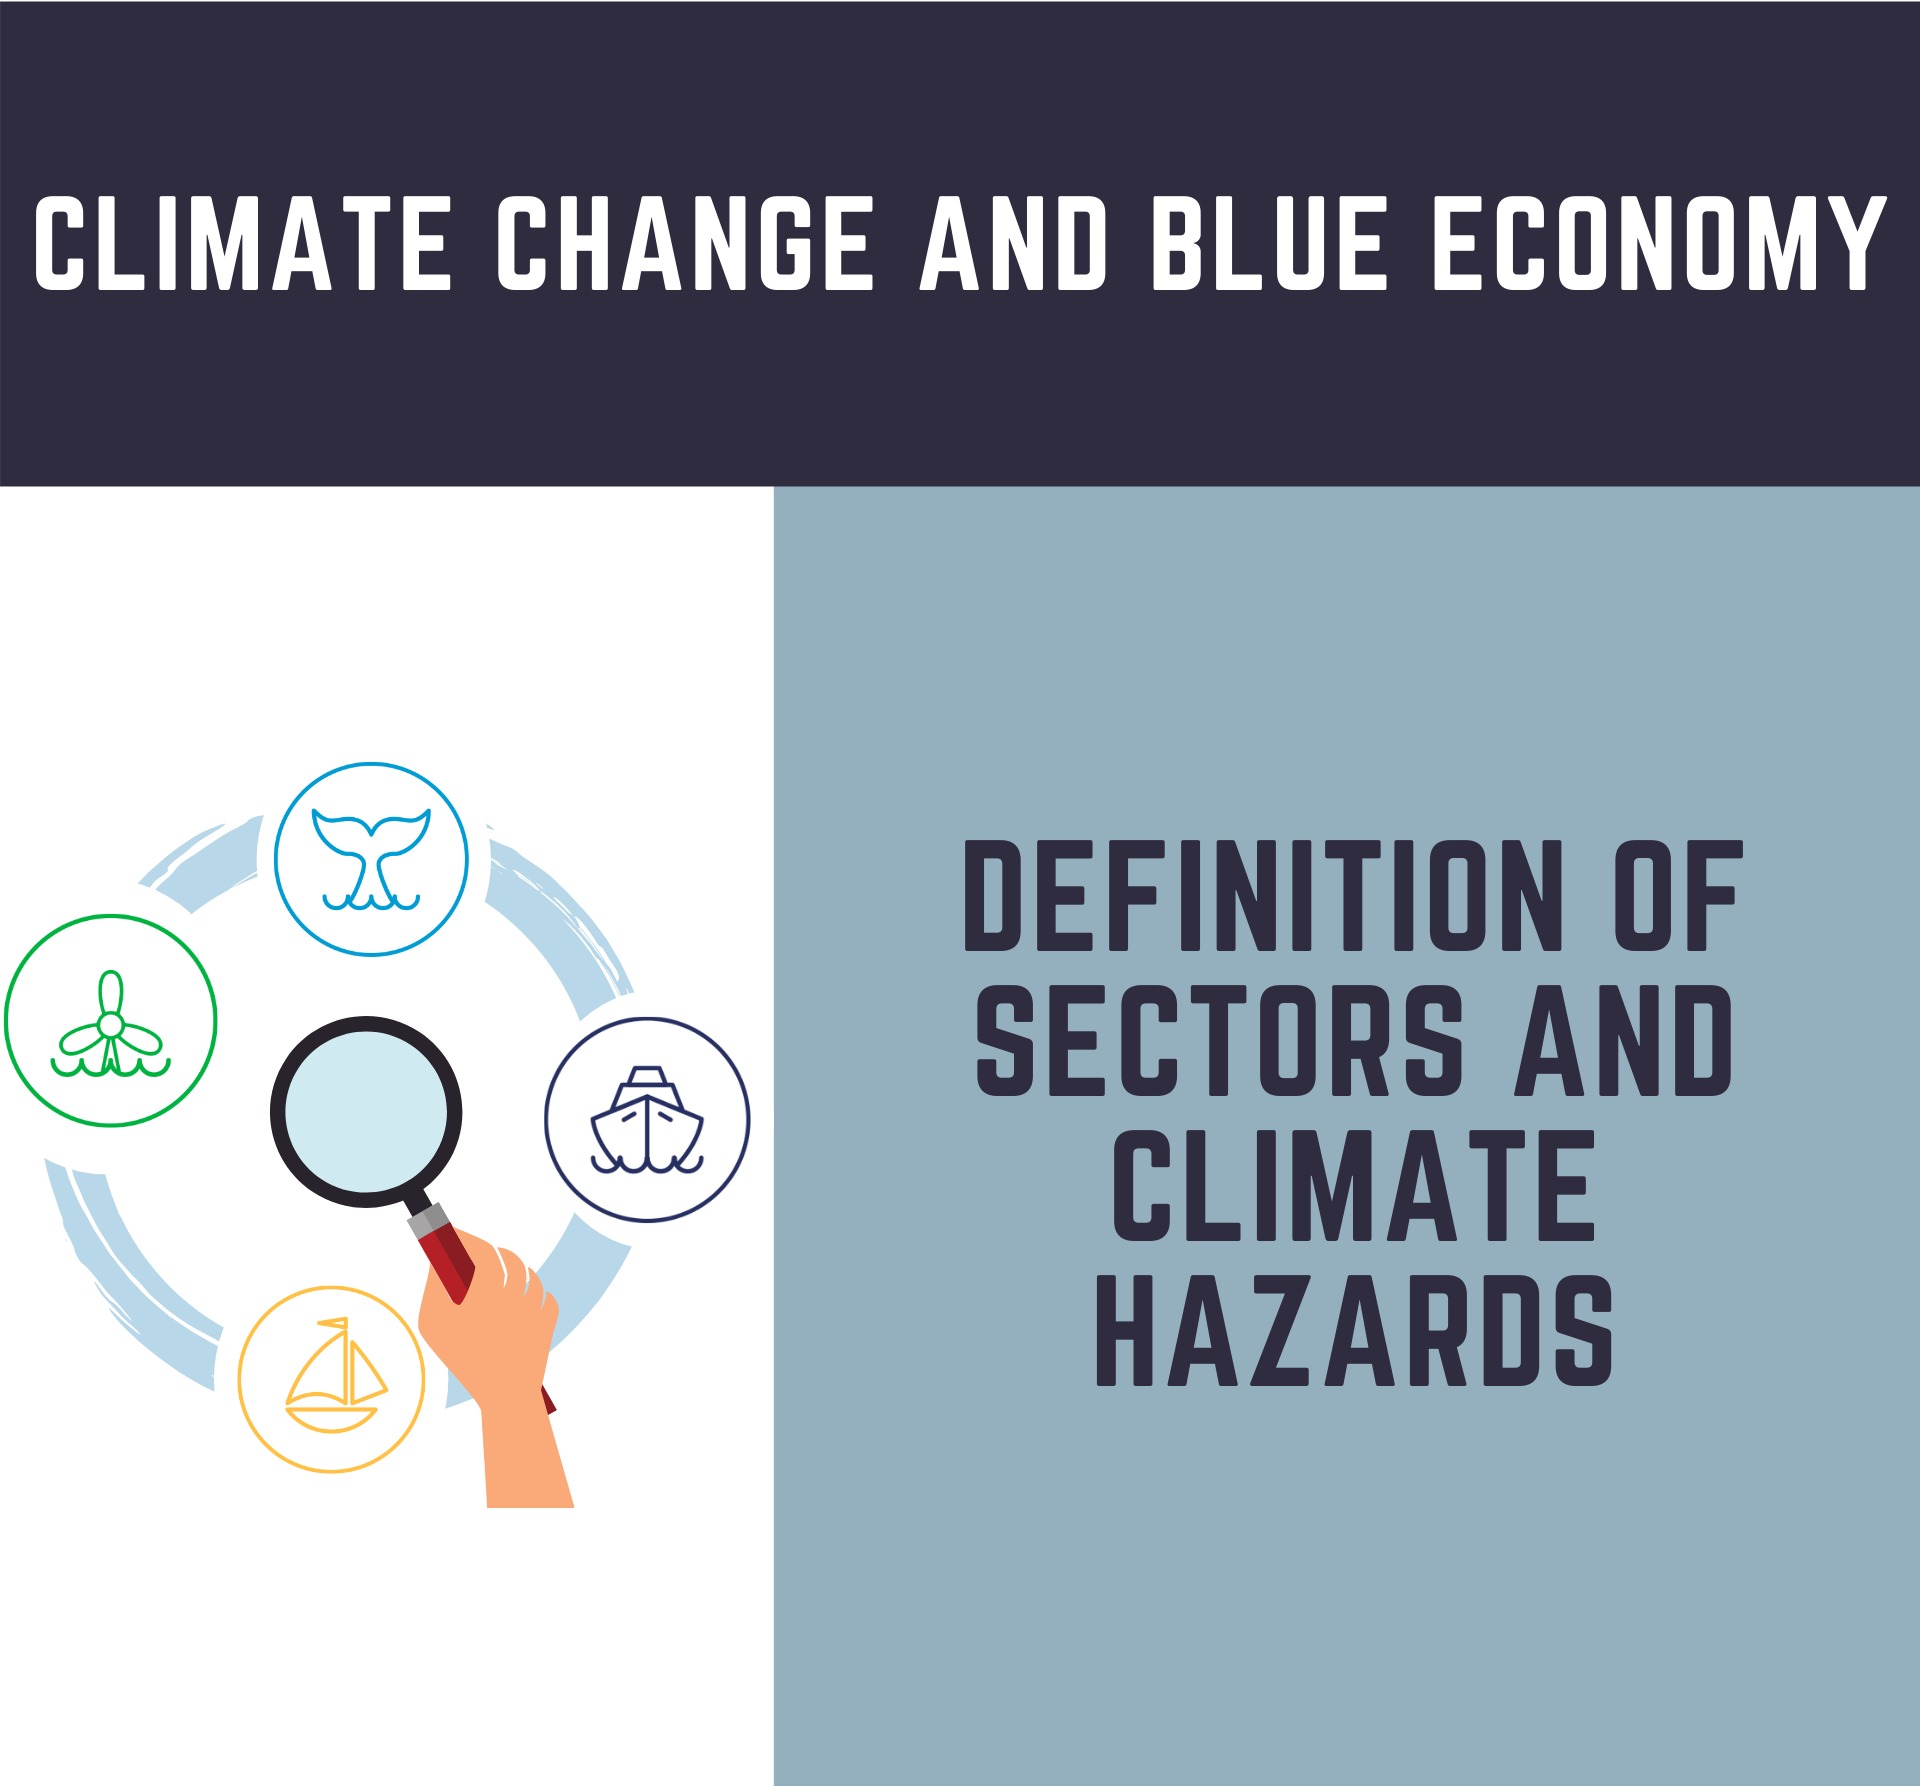 Definition of sectors and climate hazards